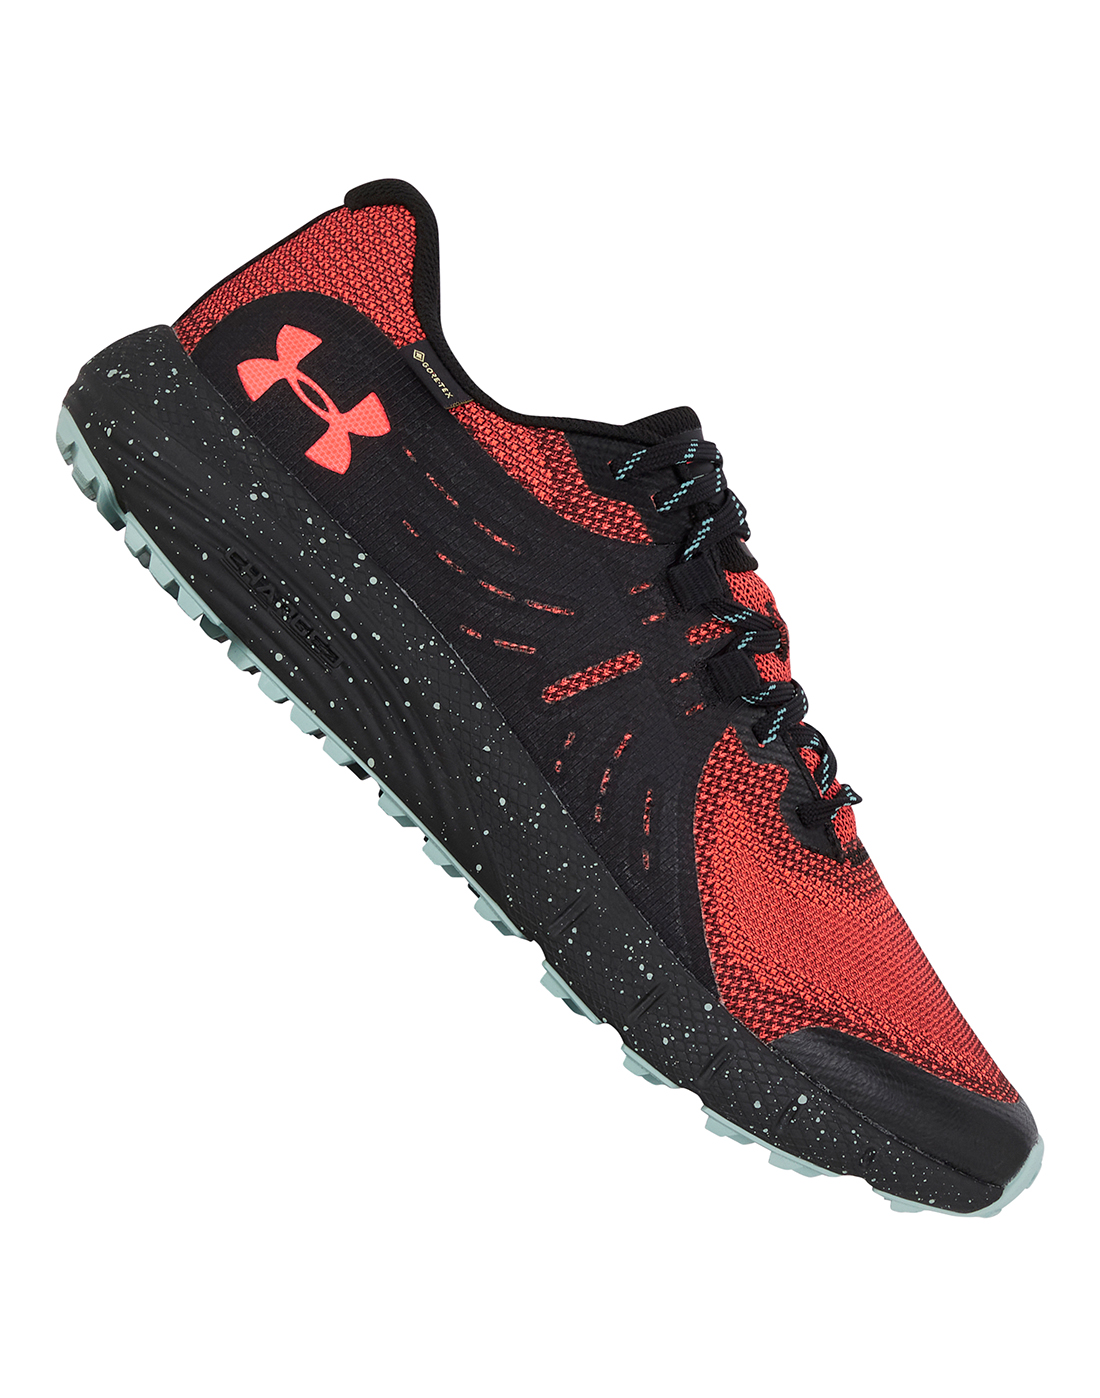 Under Armour Mens Charged Bandit Trail Sneaker 